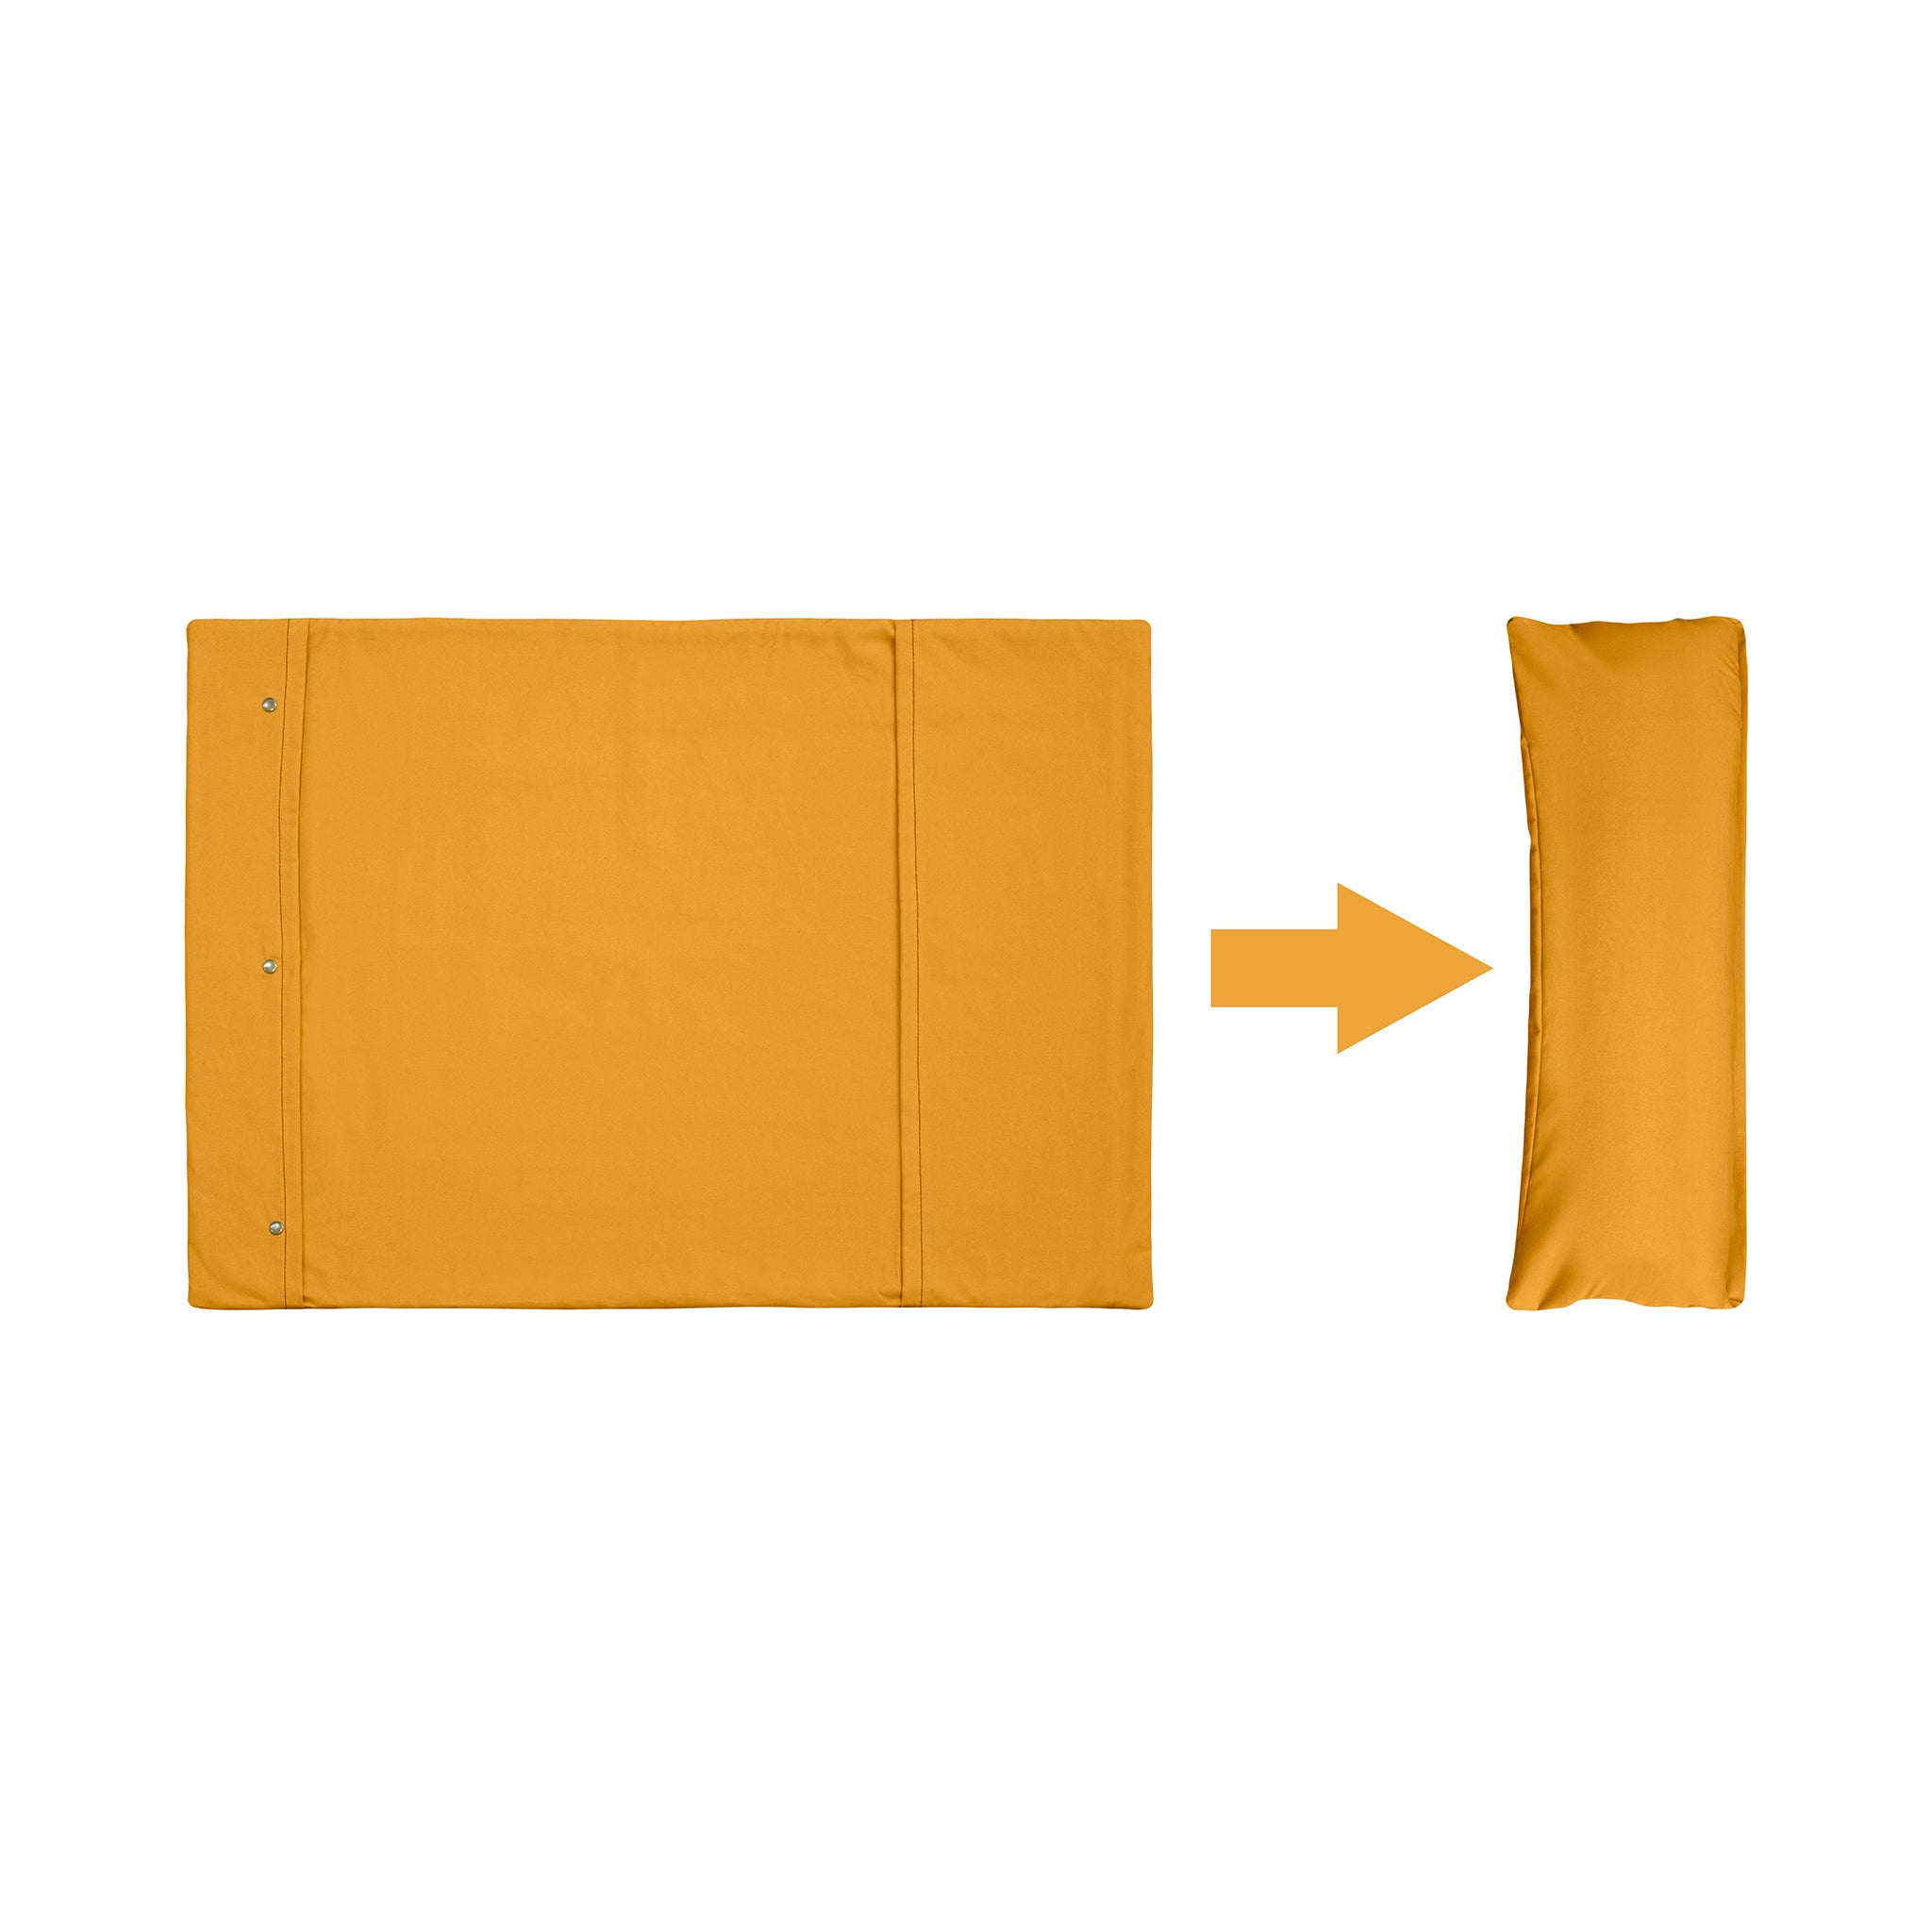 A yellow Chimney Sheep woollen travel rollup dog bed sat on a white background. This graphic illustrates how the flat rectangular woollen travel bed can be rolled up and transformed into a packaway lightweight travel dog bed.